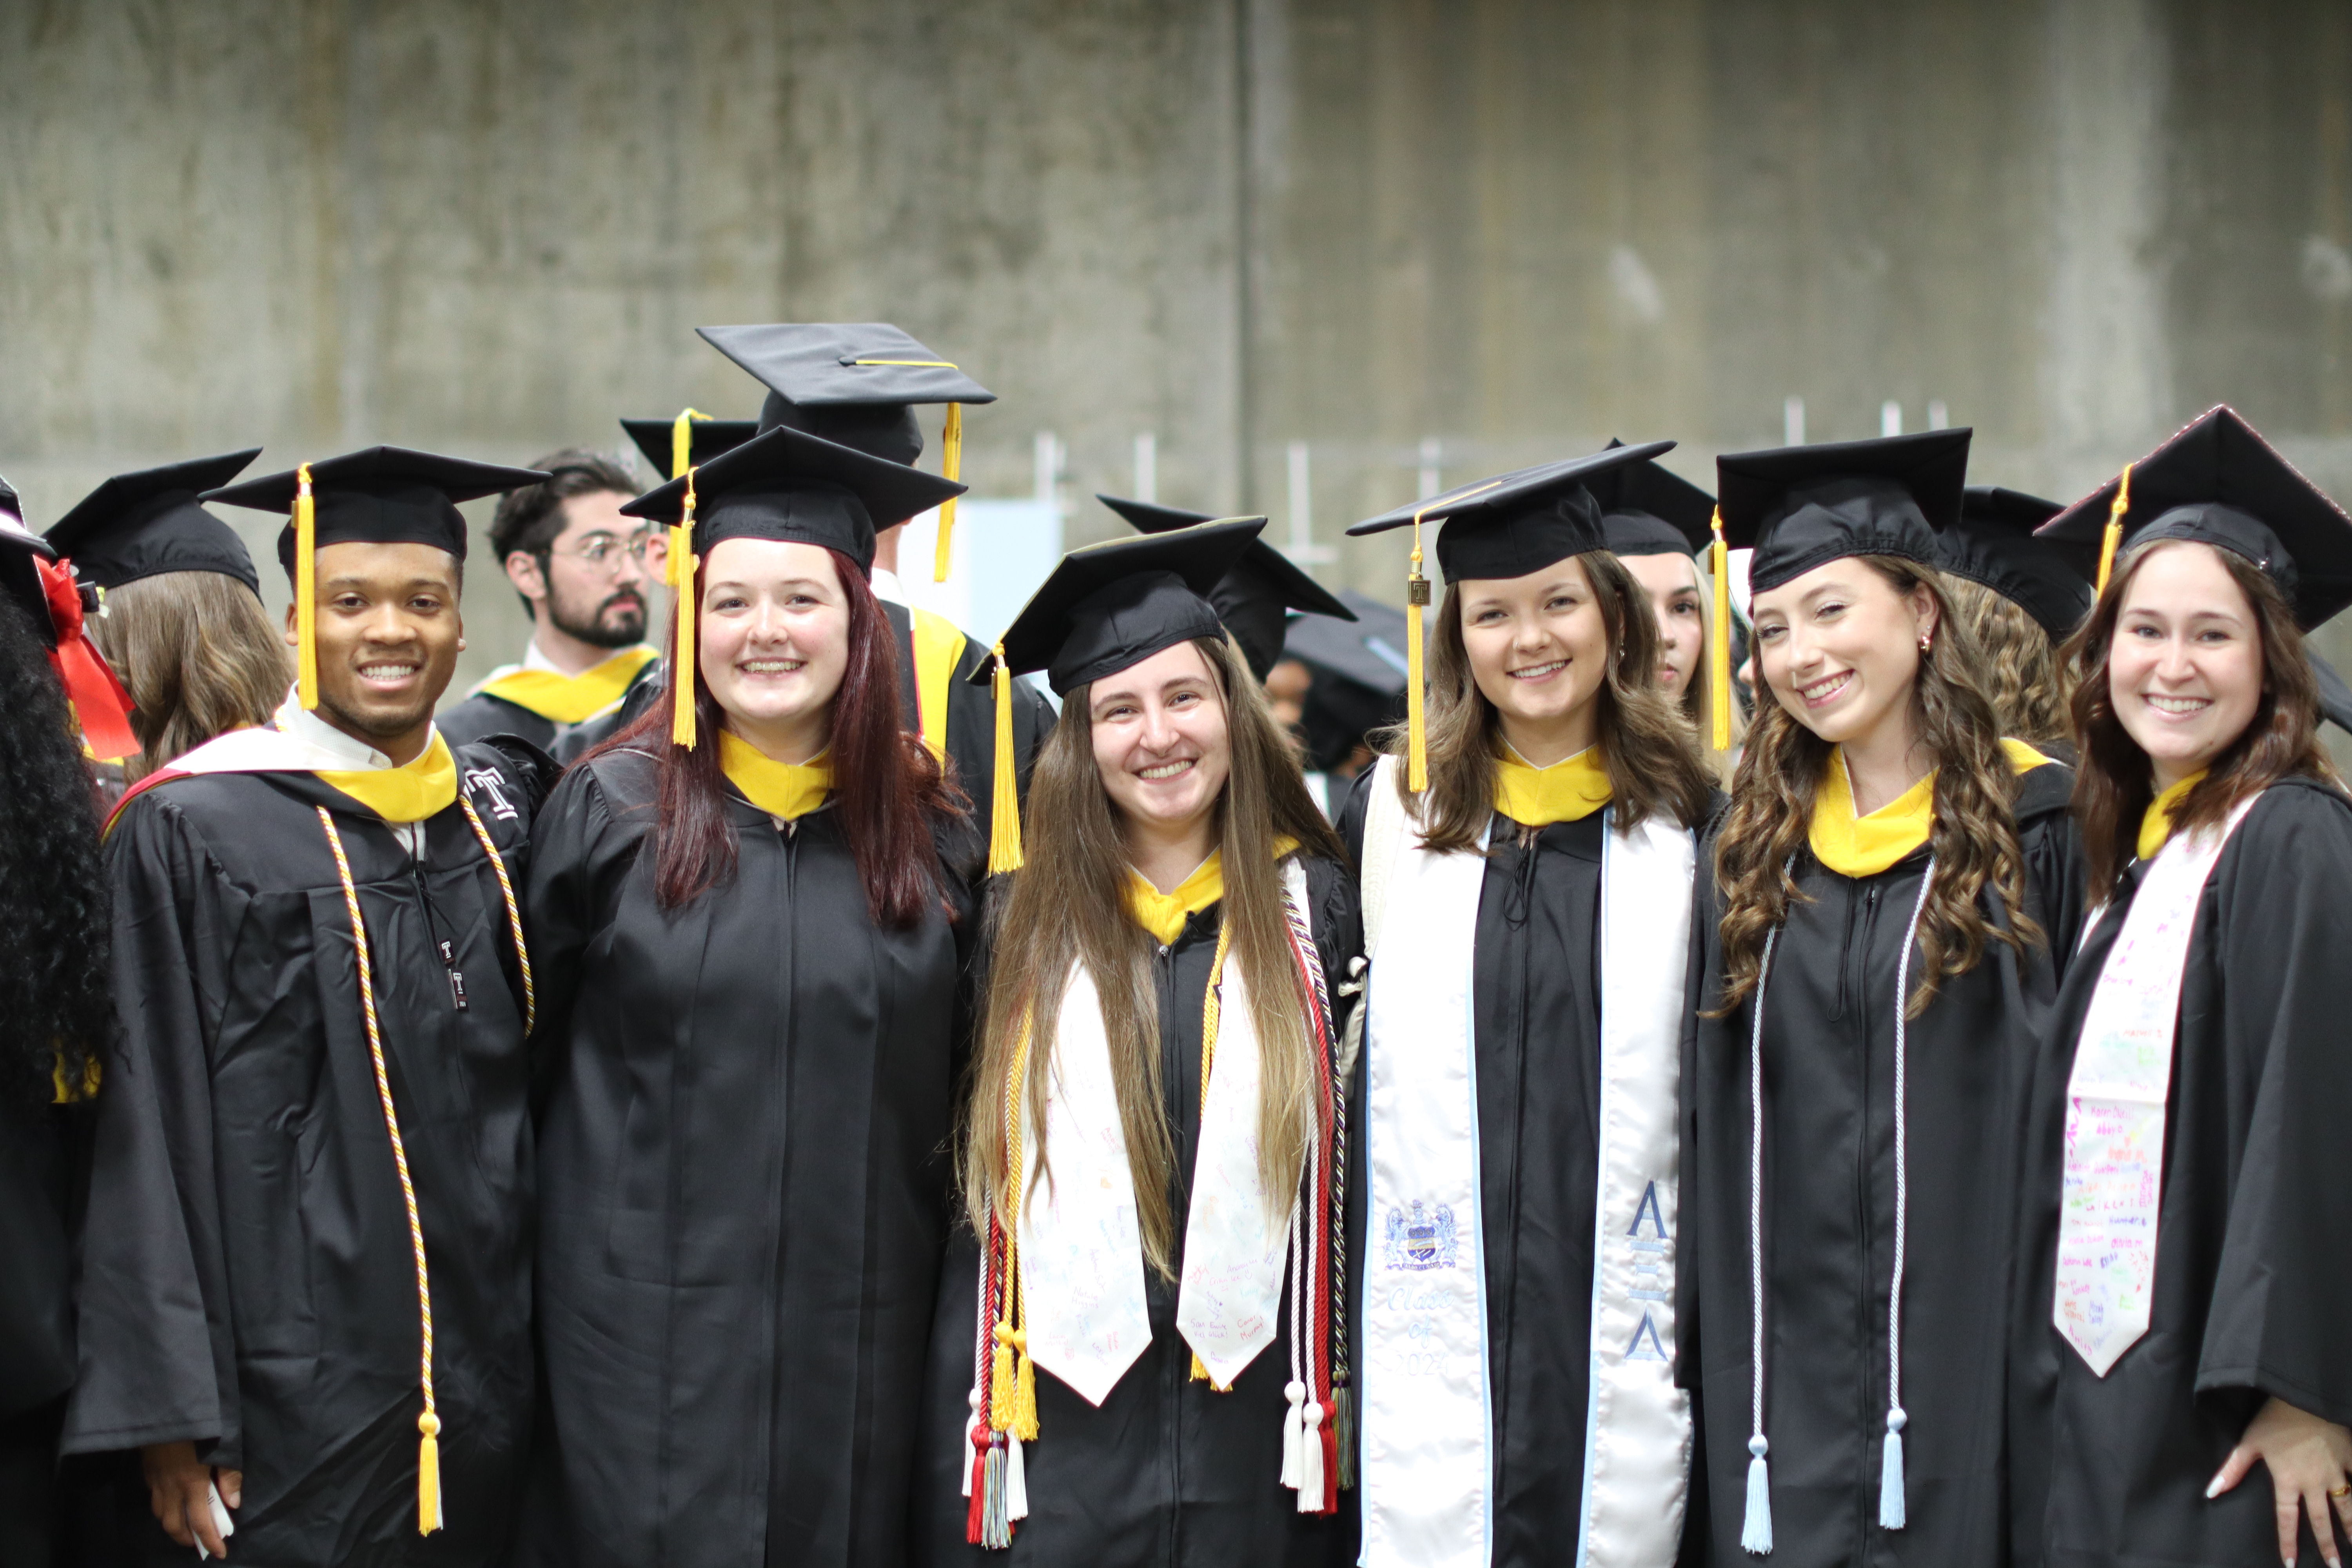 A group of students smiling together in their academic regalia before graduation